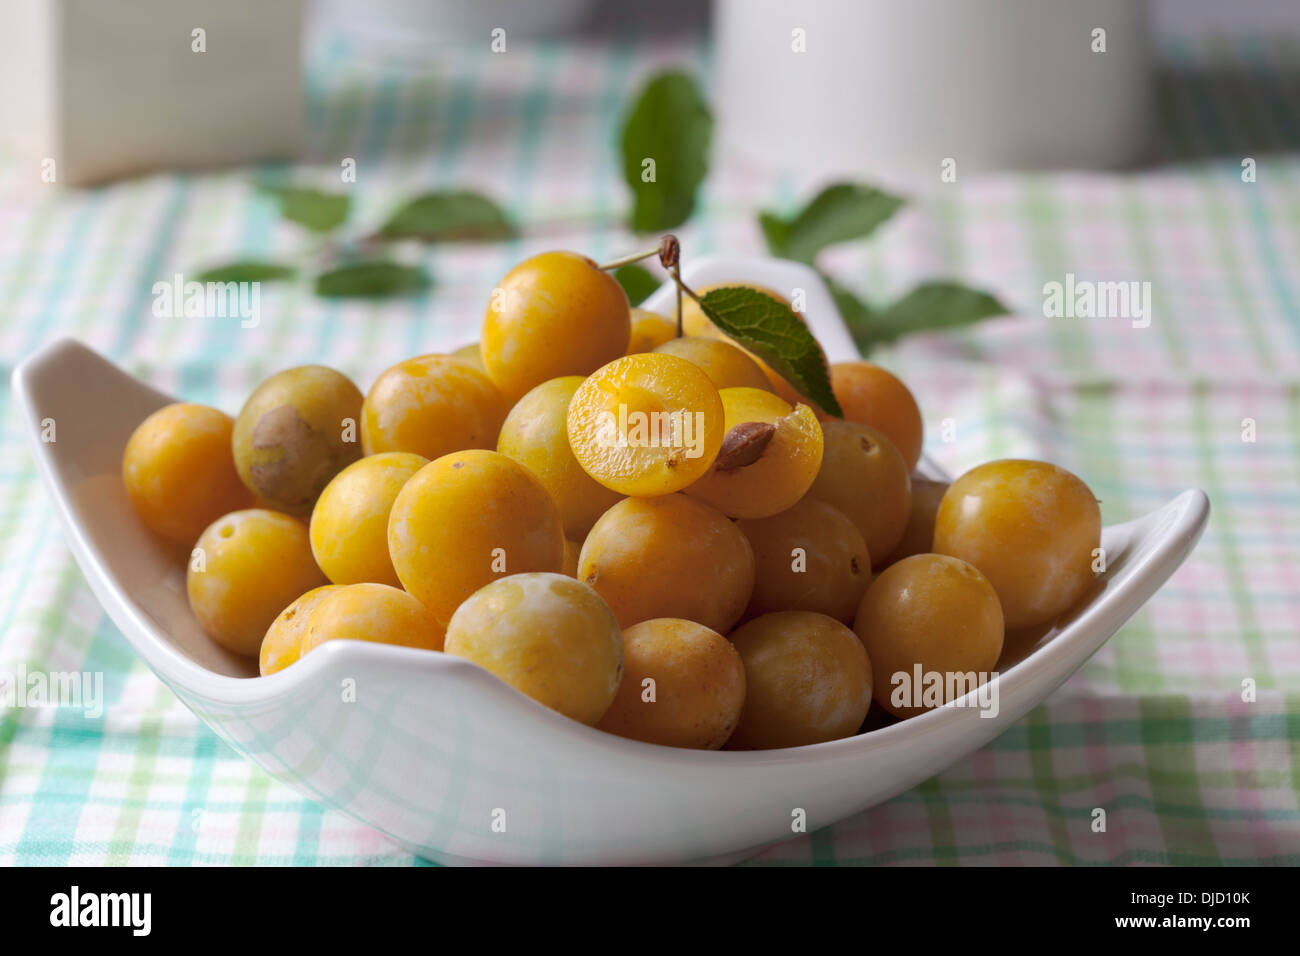 Mirabelles (Prunus domestica subsp. syriaca) in a bowl on wooden table, studio shot Stock Photo